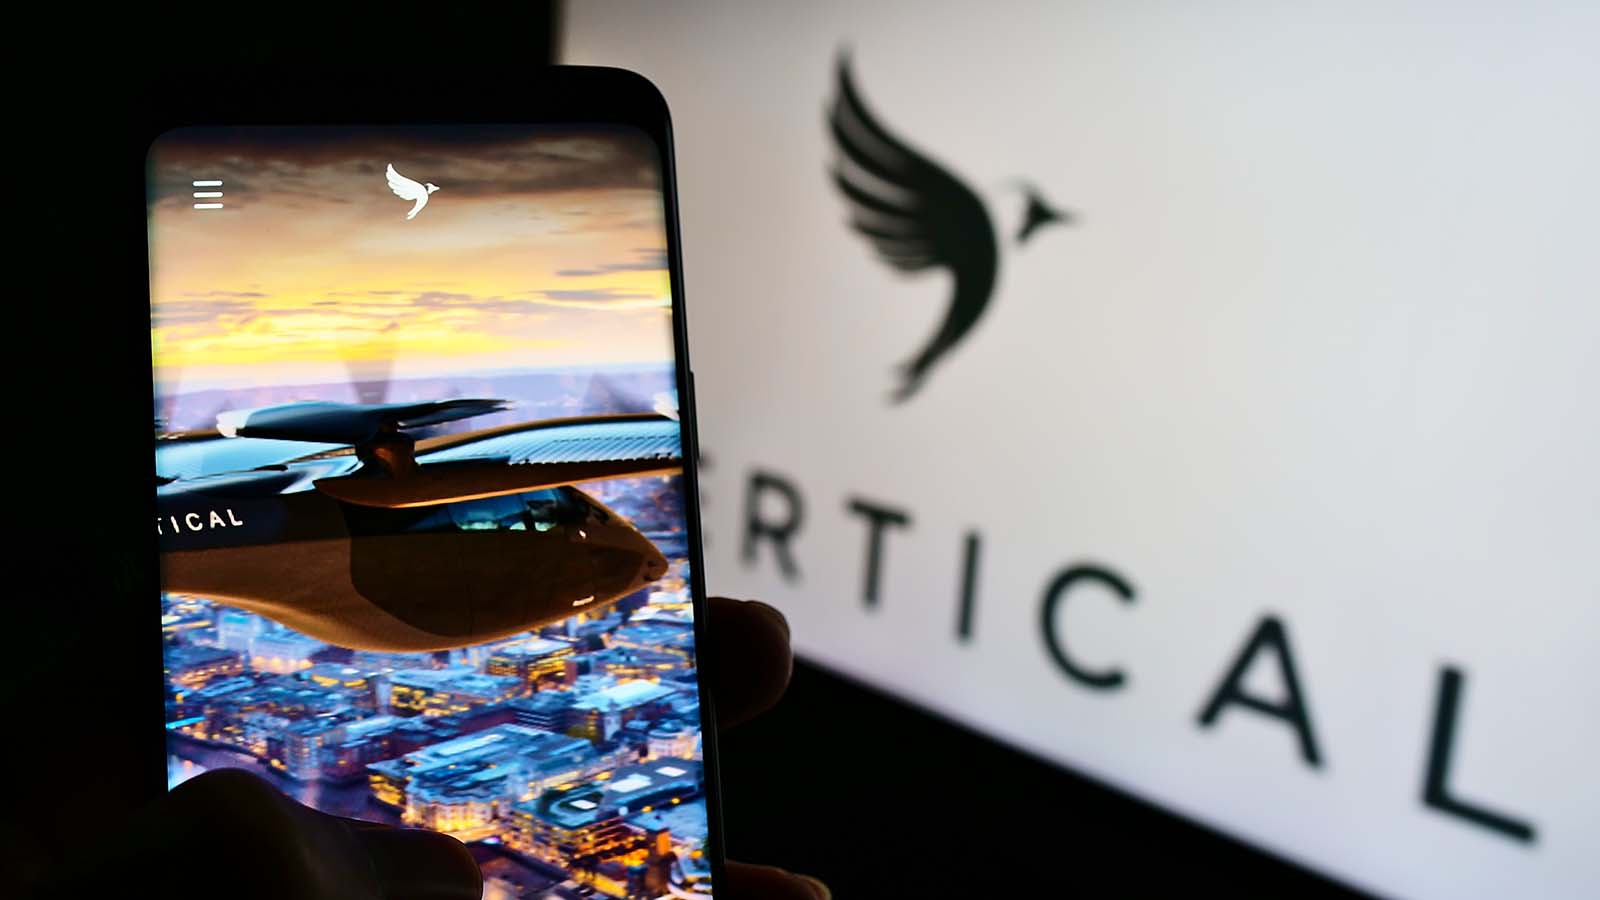 The logo for Vertical Aerospace (EVTL stock) displayed on a smartphone screen.